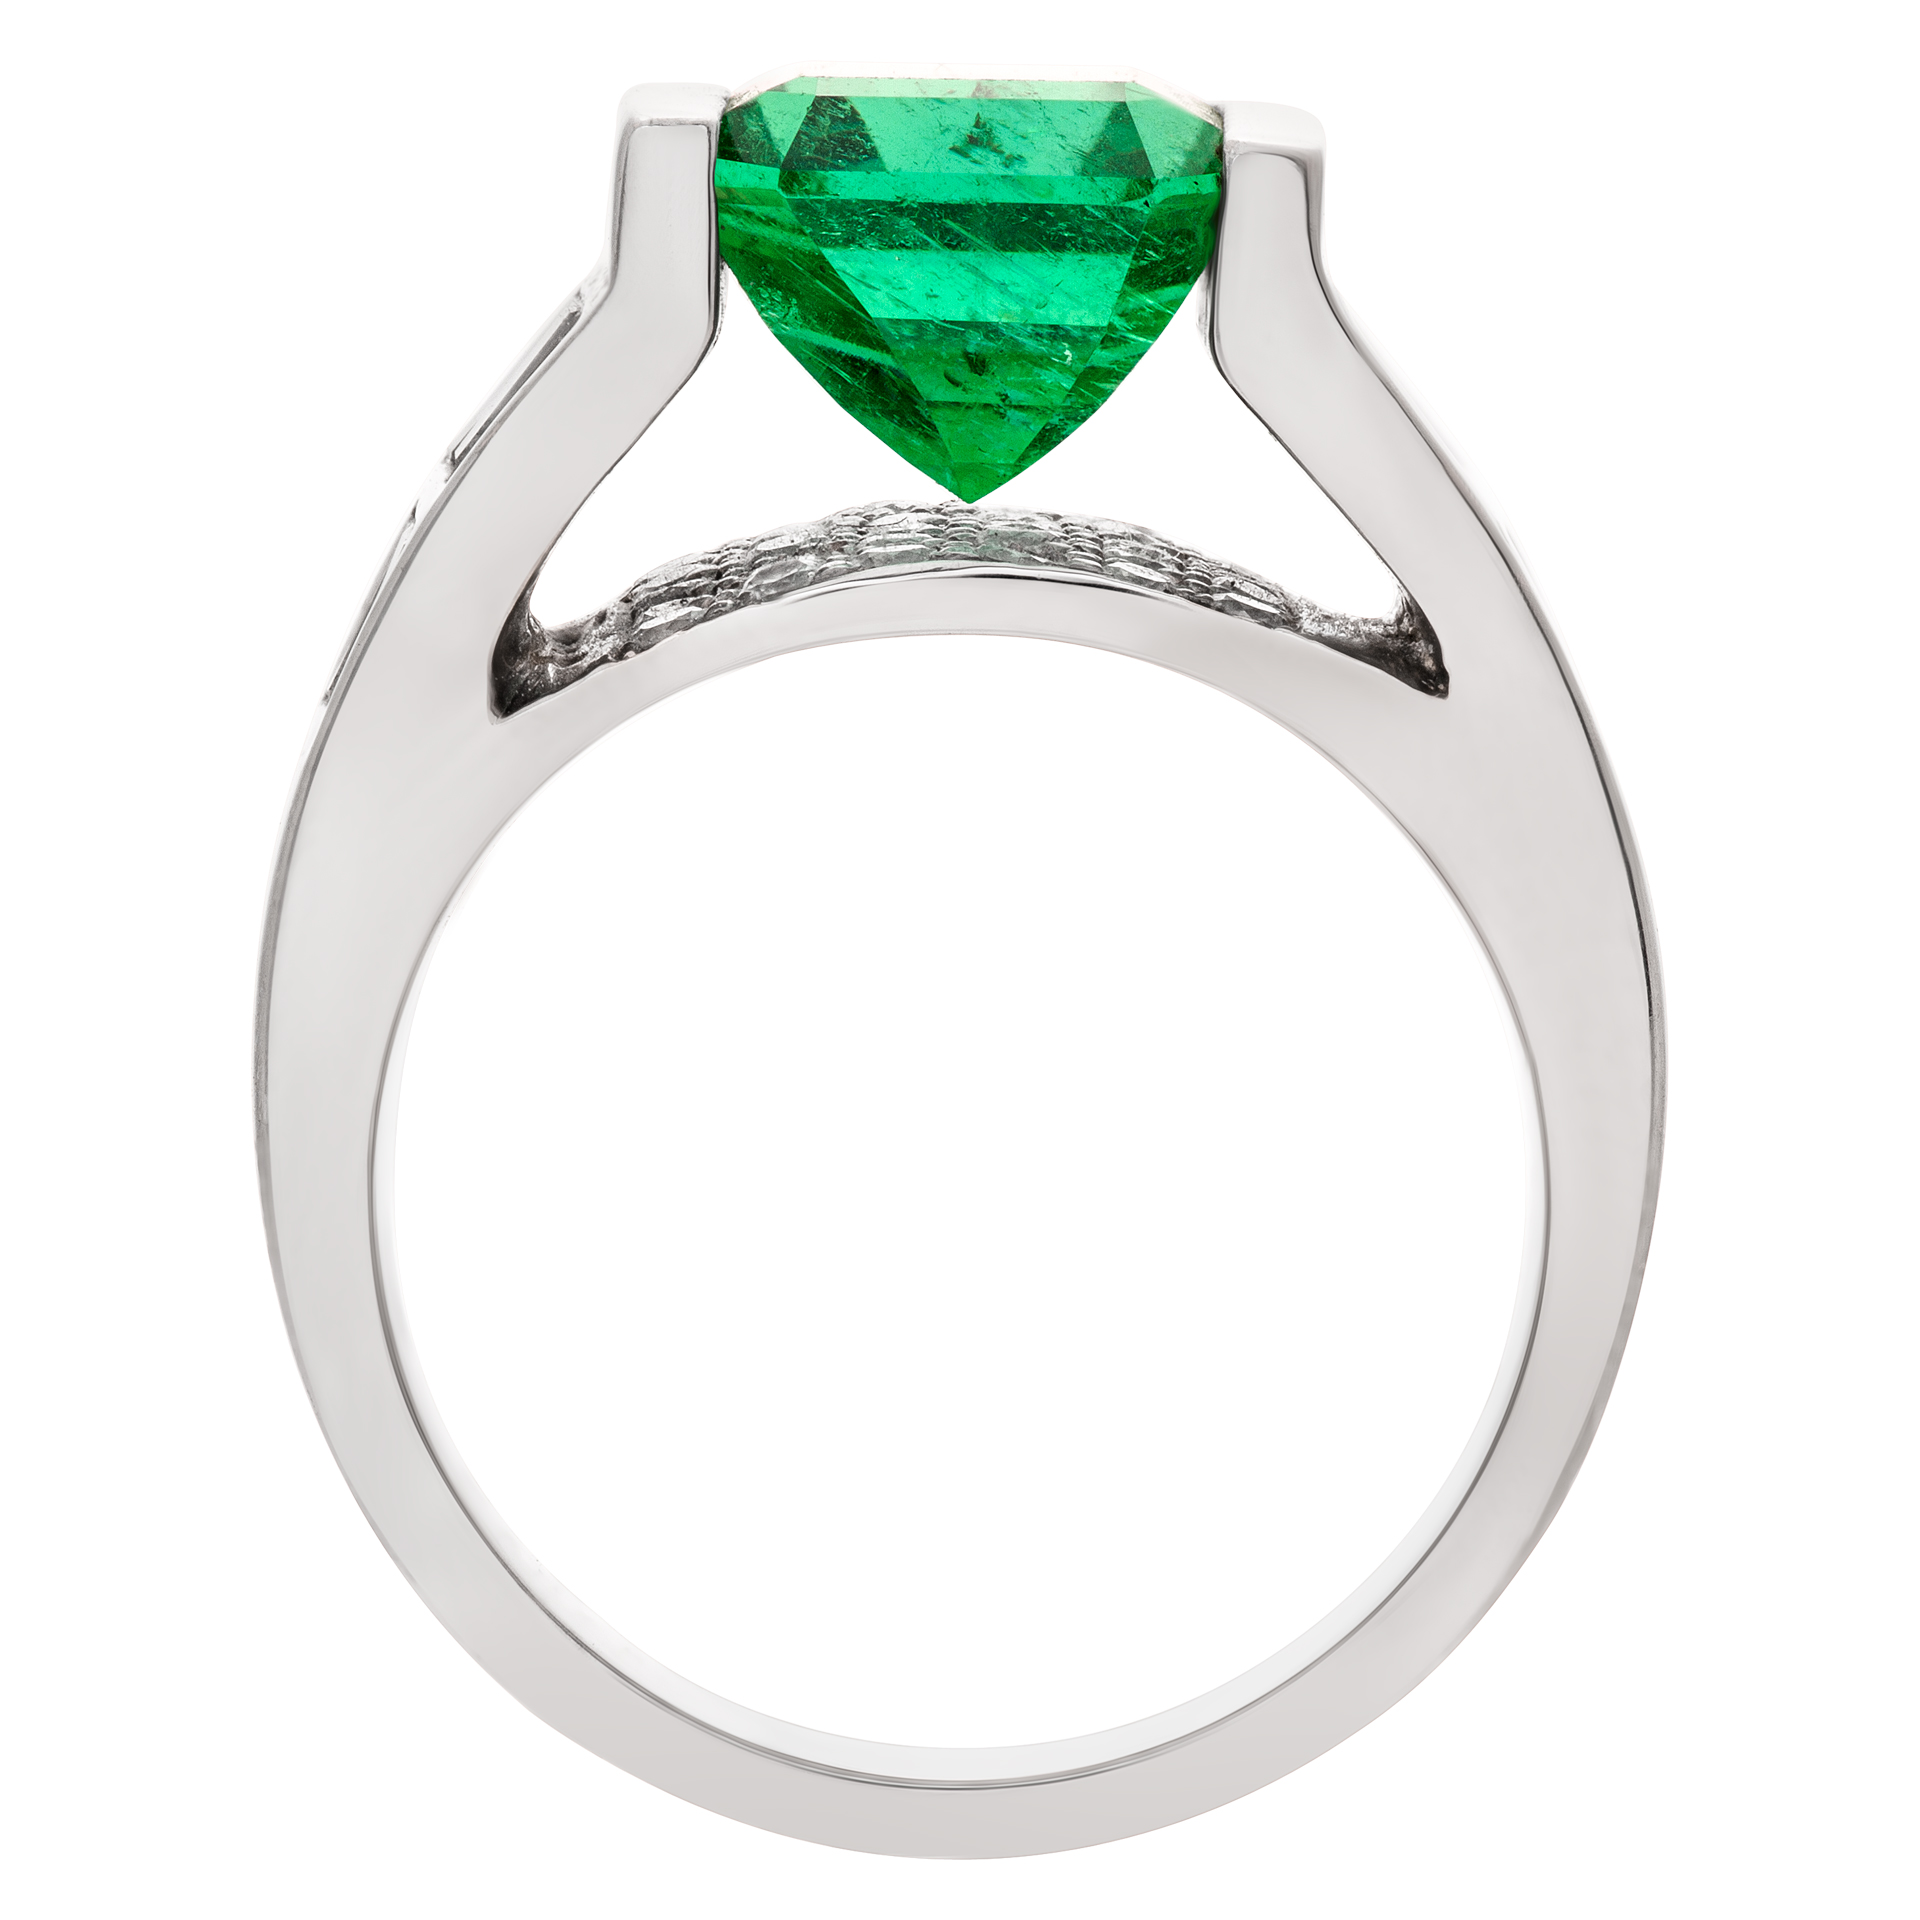 Emerald ring in 14k white gold. 3.16 Carat emerald, 1.05 Cts in diamonds. image 4